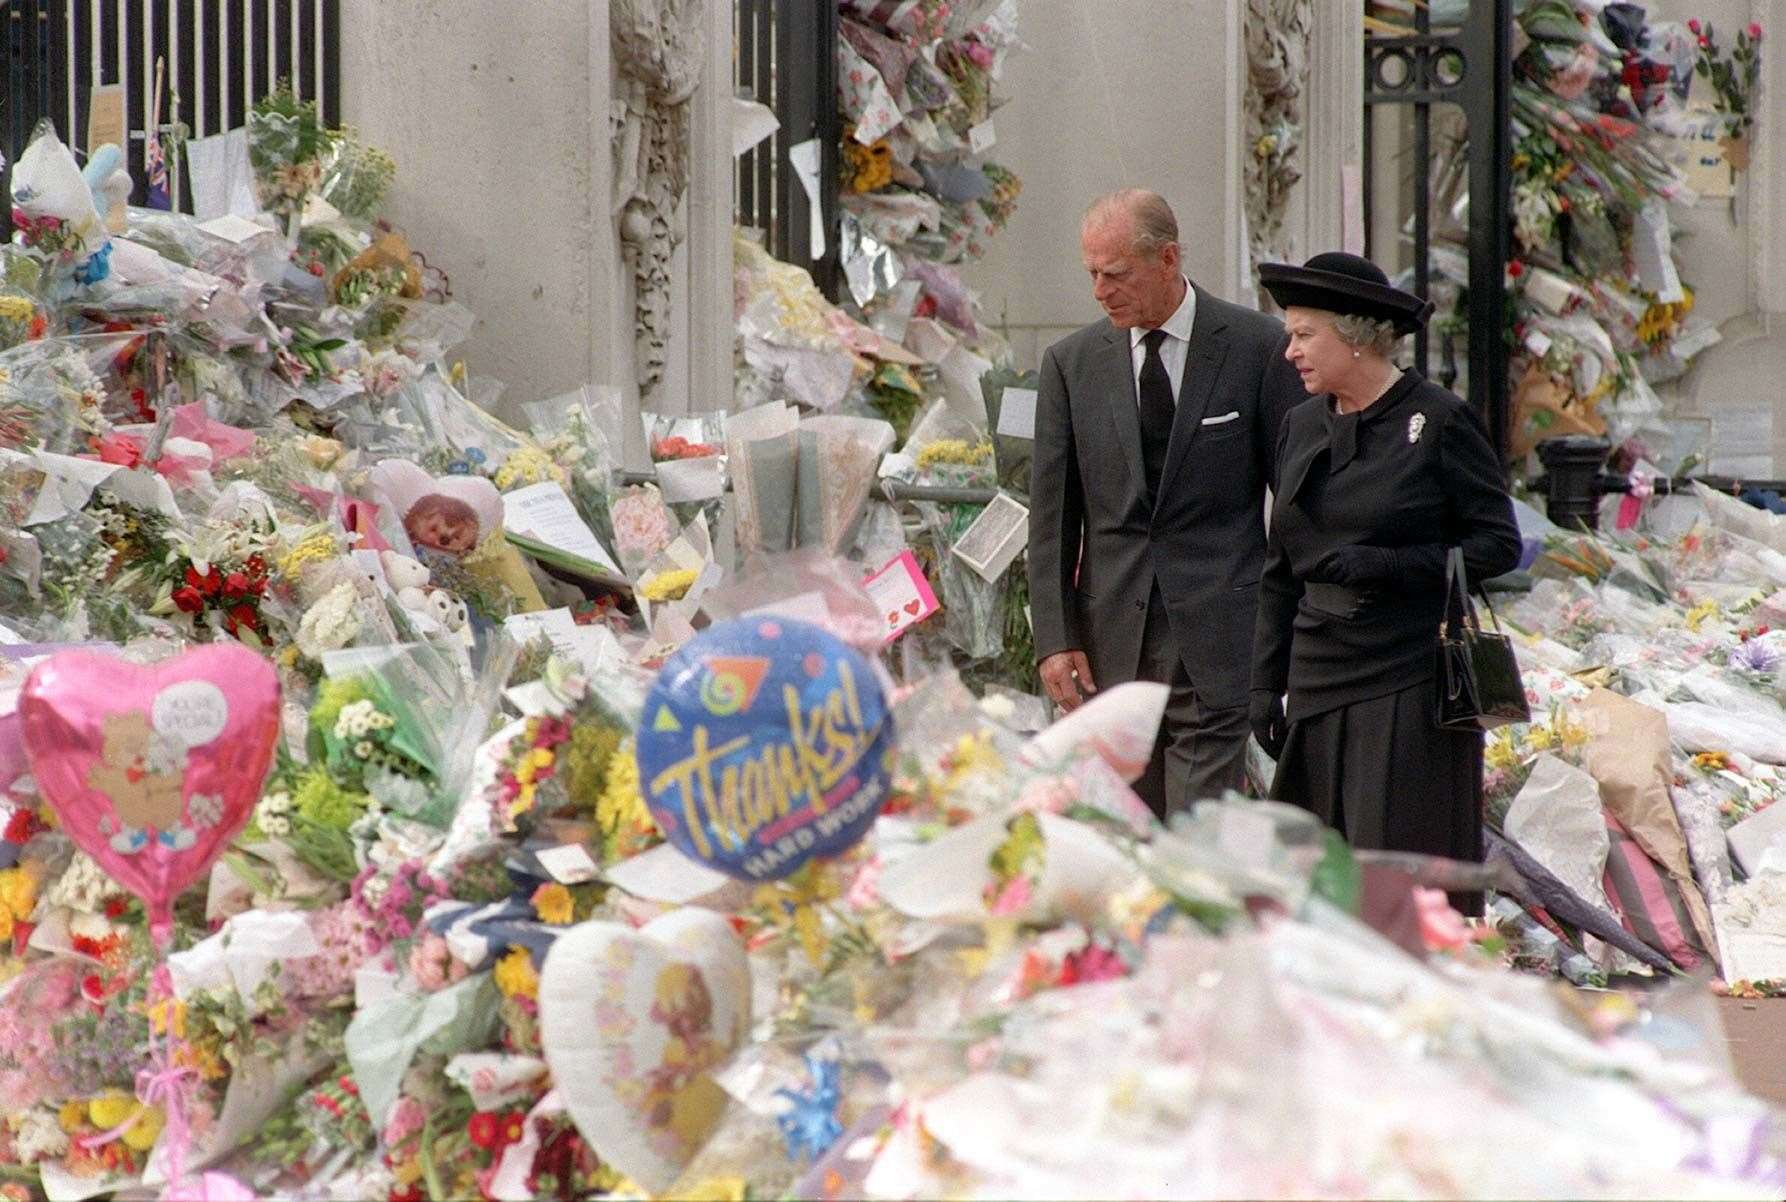 The Queen and Duke of Edinburgh view the floral tributes to Diana, Princess of Wales, after her death in a car crash in Paris in 1997 (John Stillwell/PA)